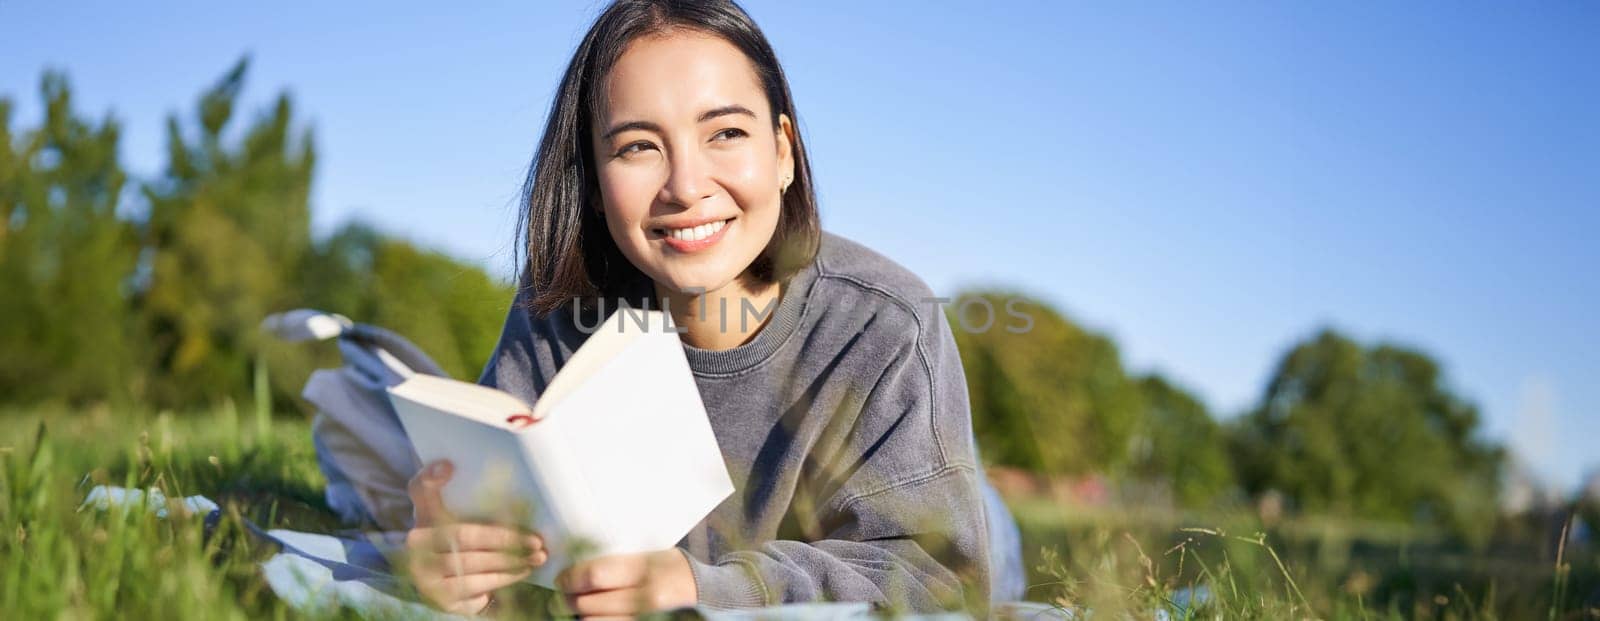 Portrait of cute korean girl, reading in park while lying on grass, relaxing with favorite book in hands, smiling happily.